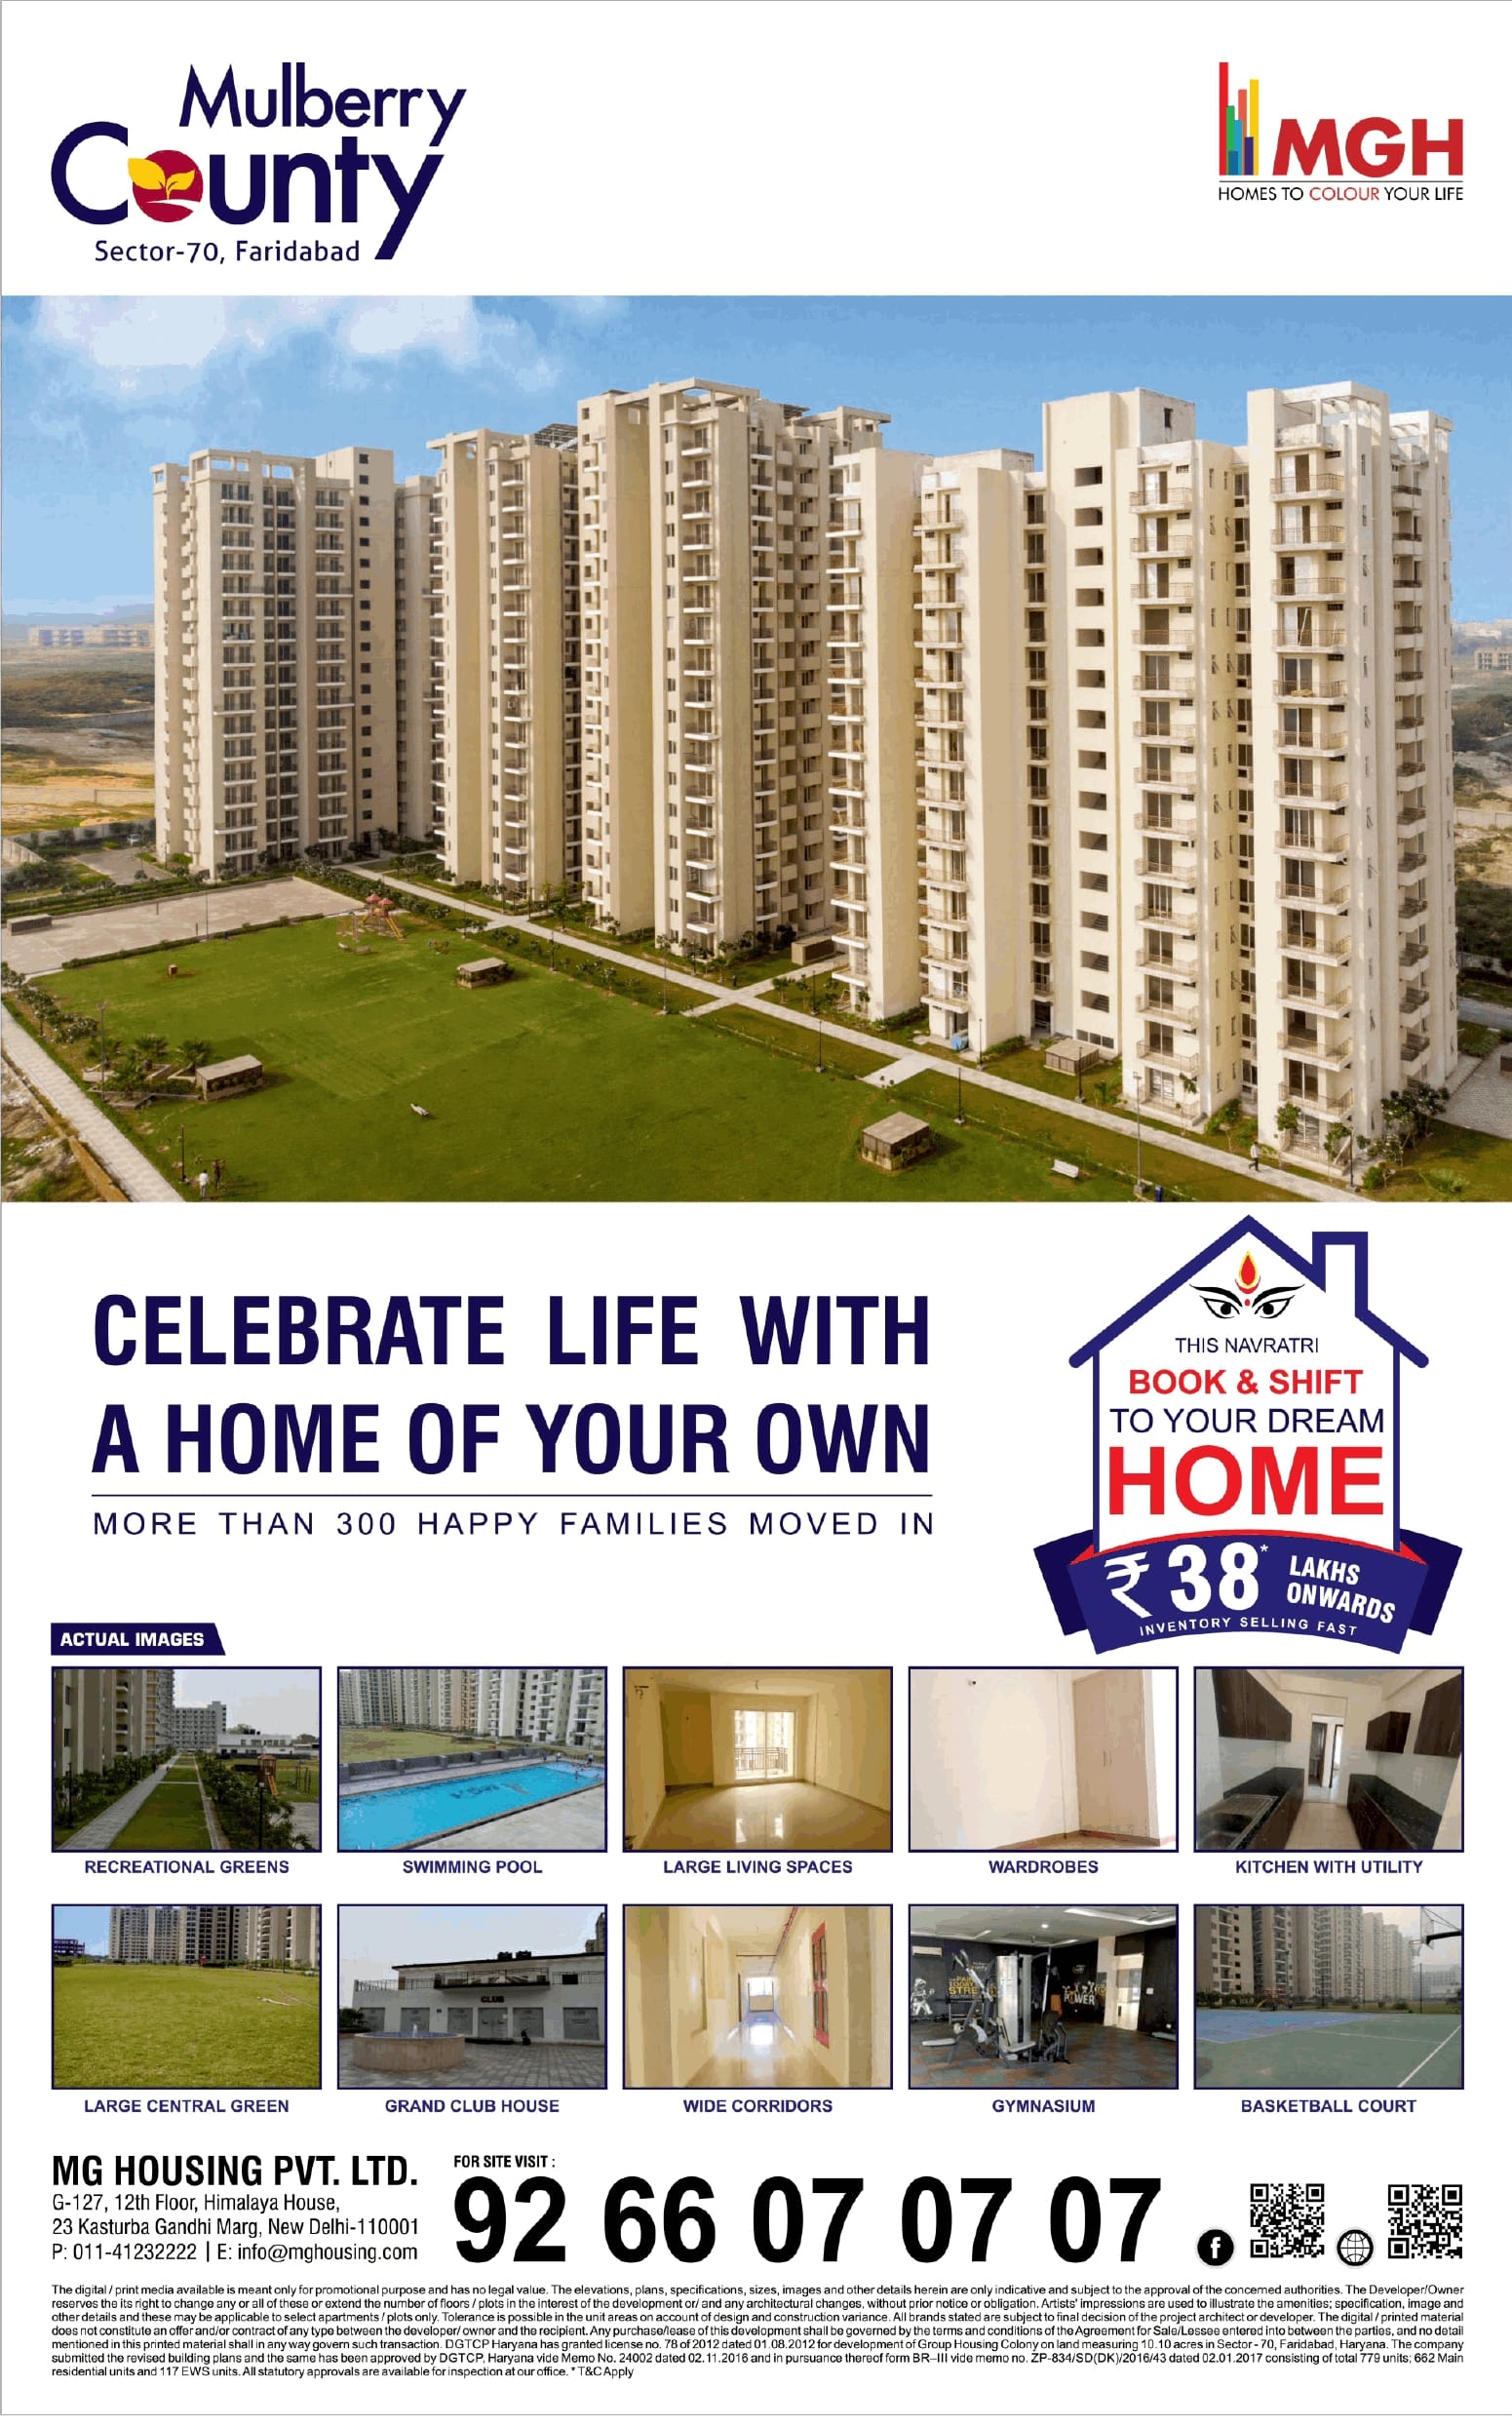 mulberry-county-celebrate-life-with-a-home-of-your-own-ad-delhi-times-16-04-2021